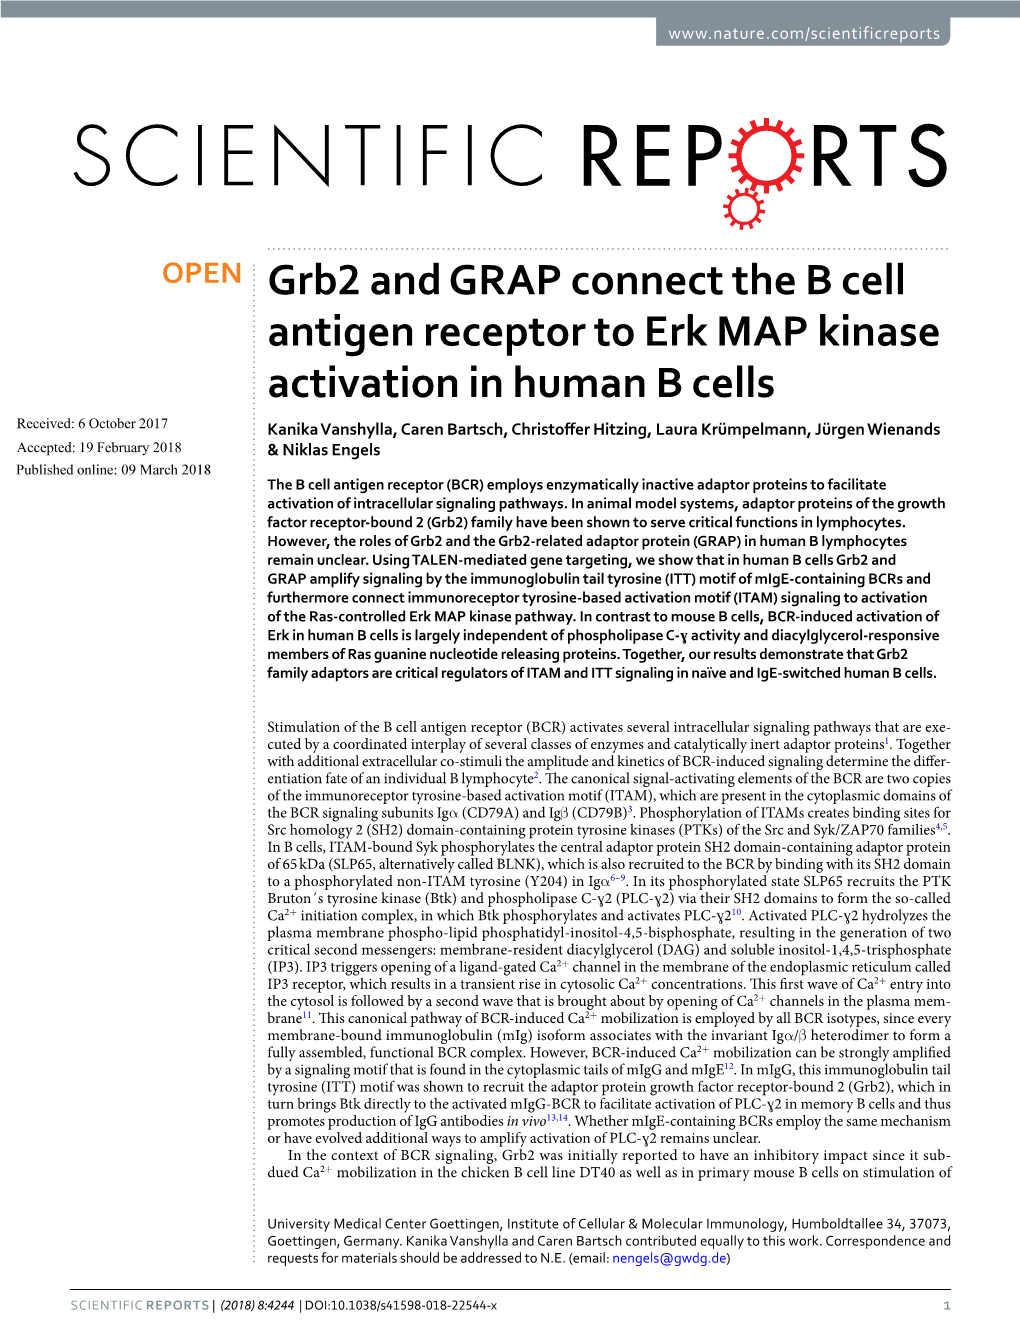 Grb2 and GRAP Connect the B Cell Antigen Receptor to Erk MAP Kinase